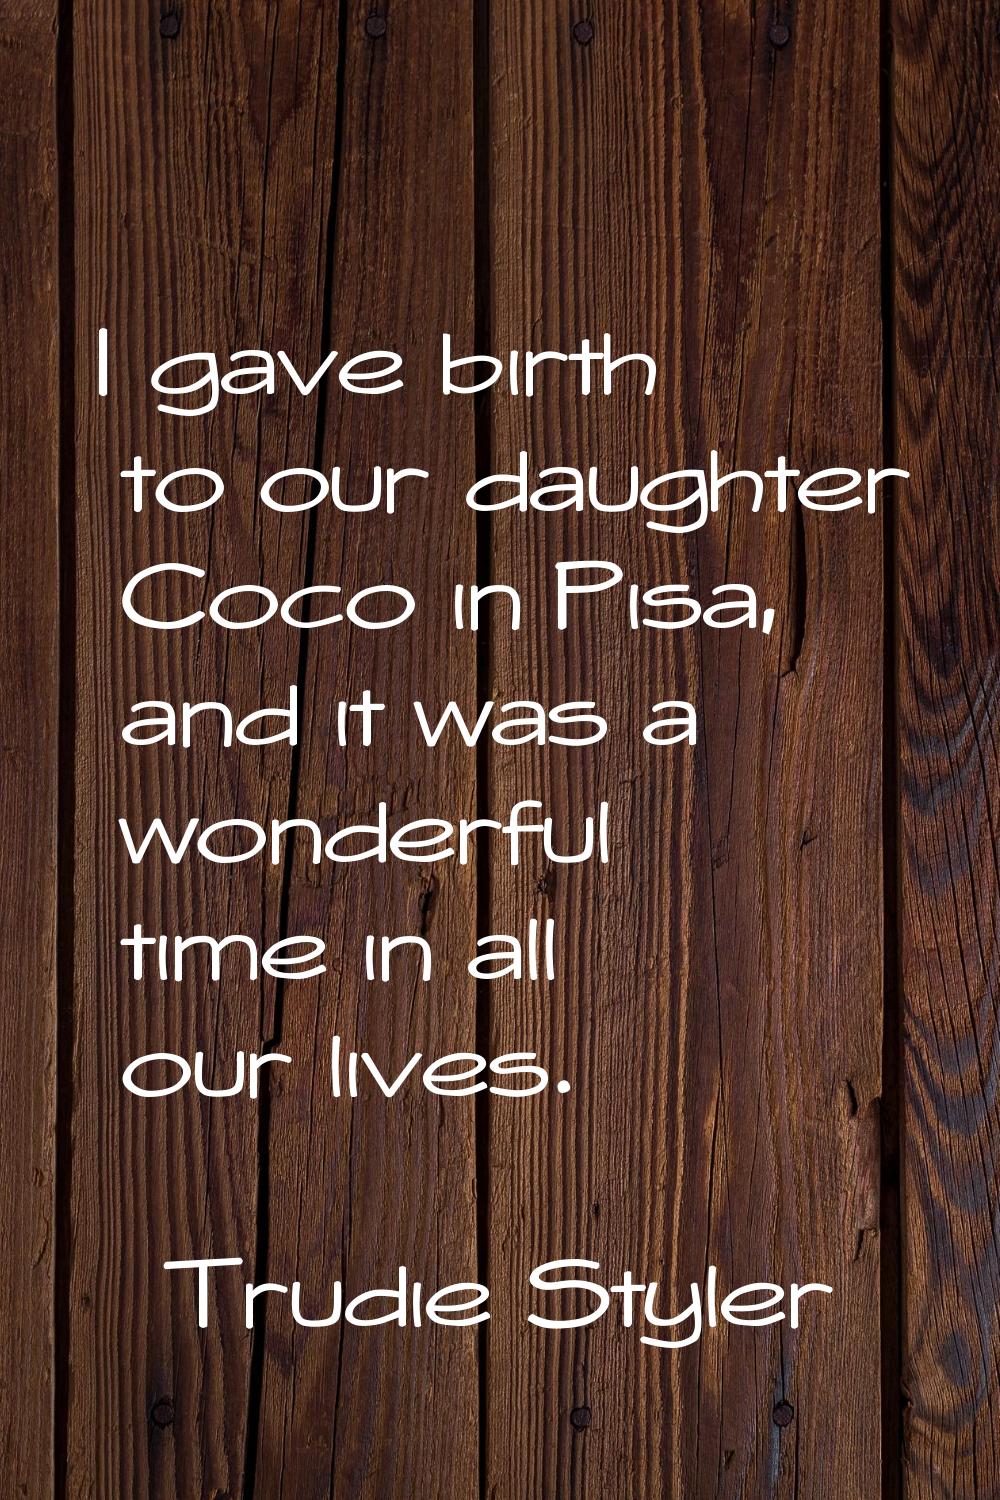 I gave birth to our daughter Coco in Pisa, and it was a wonderful time in all our lives.